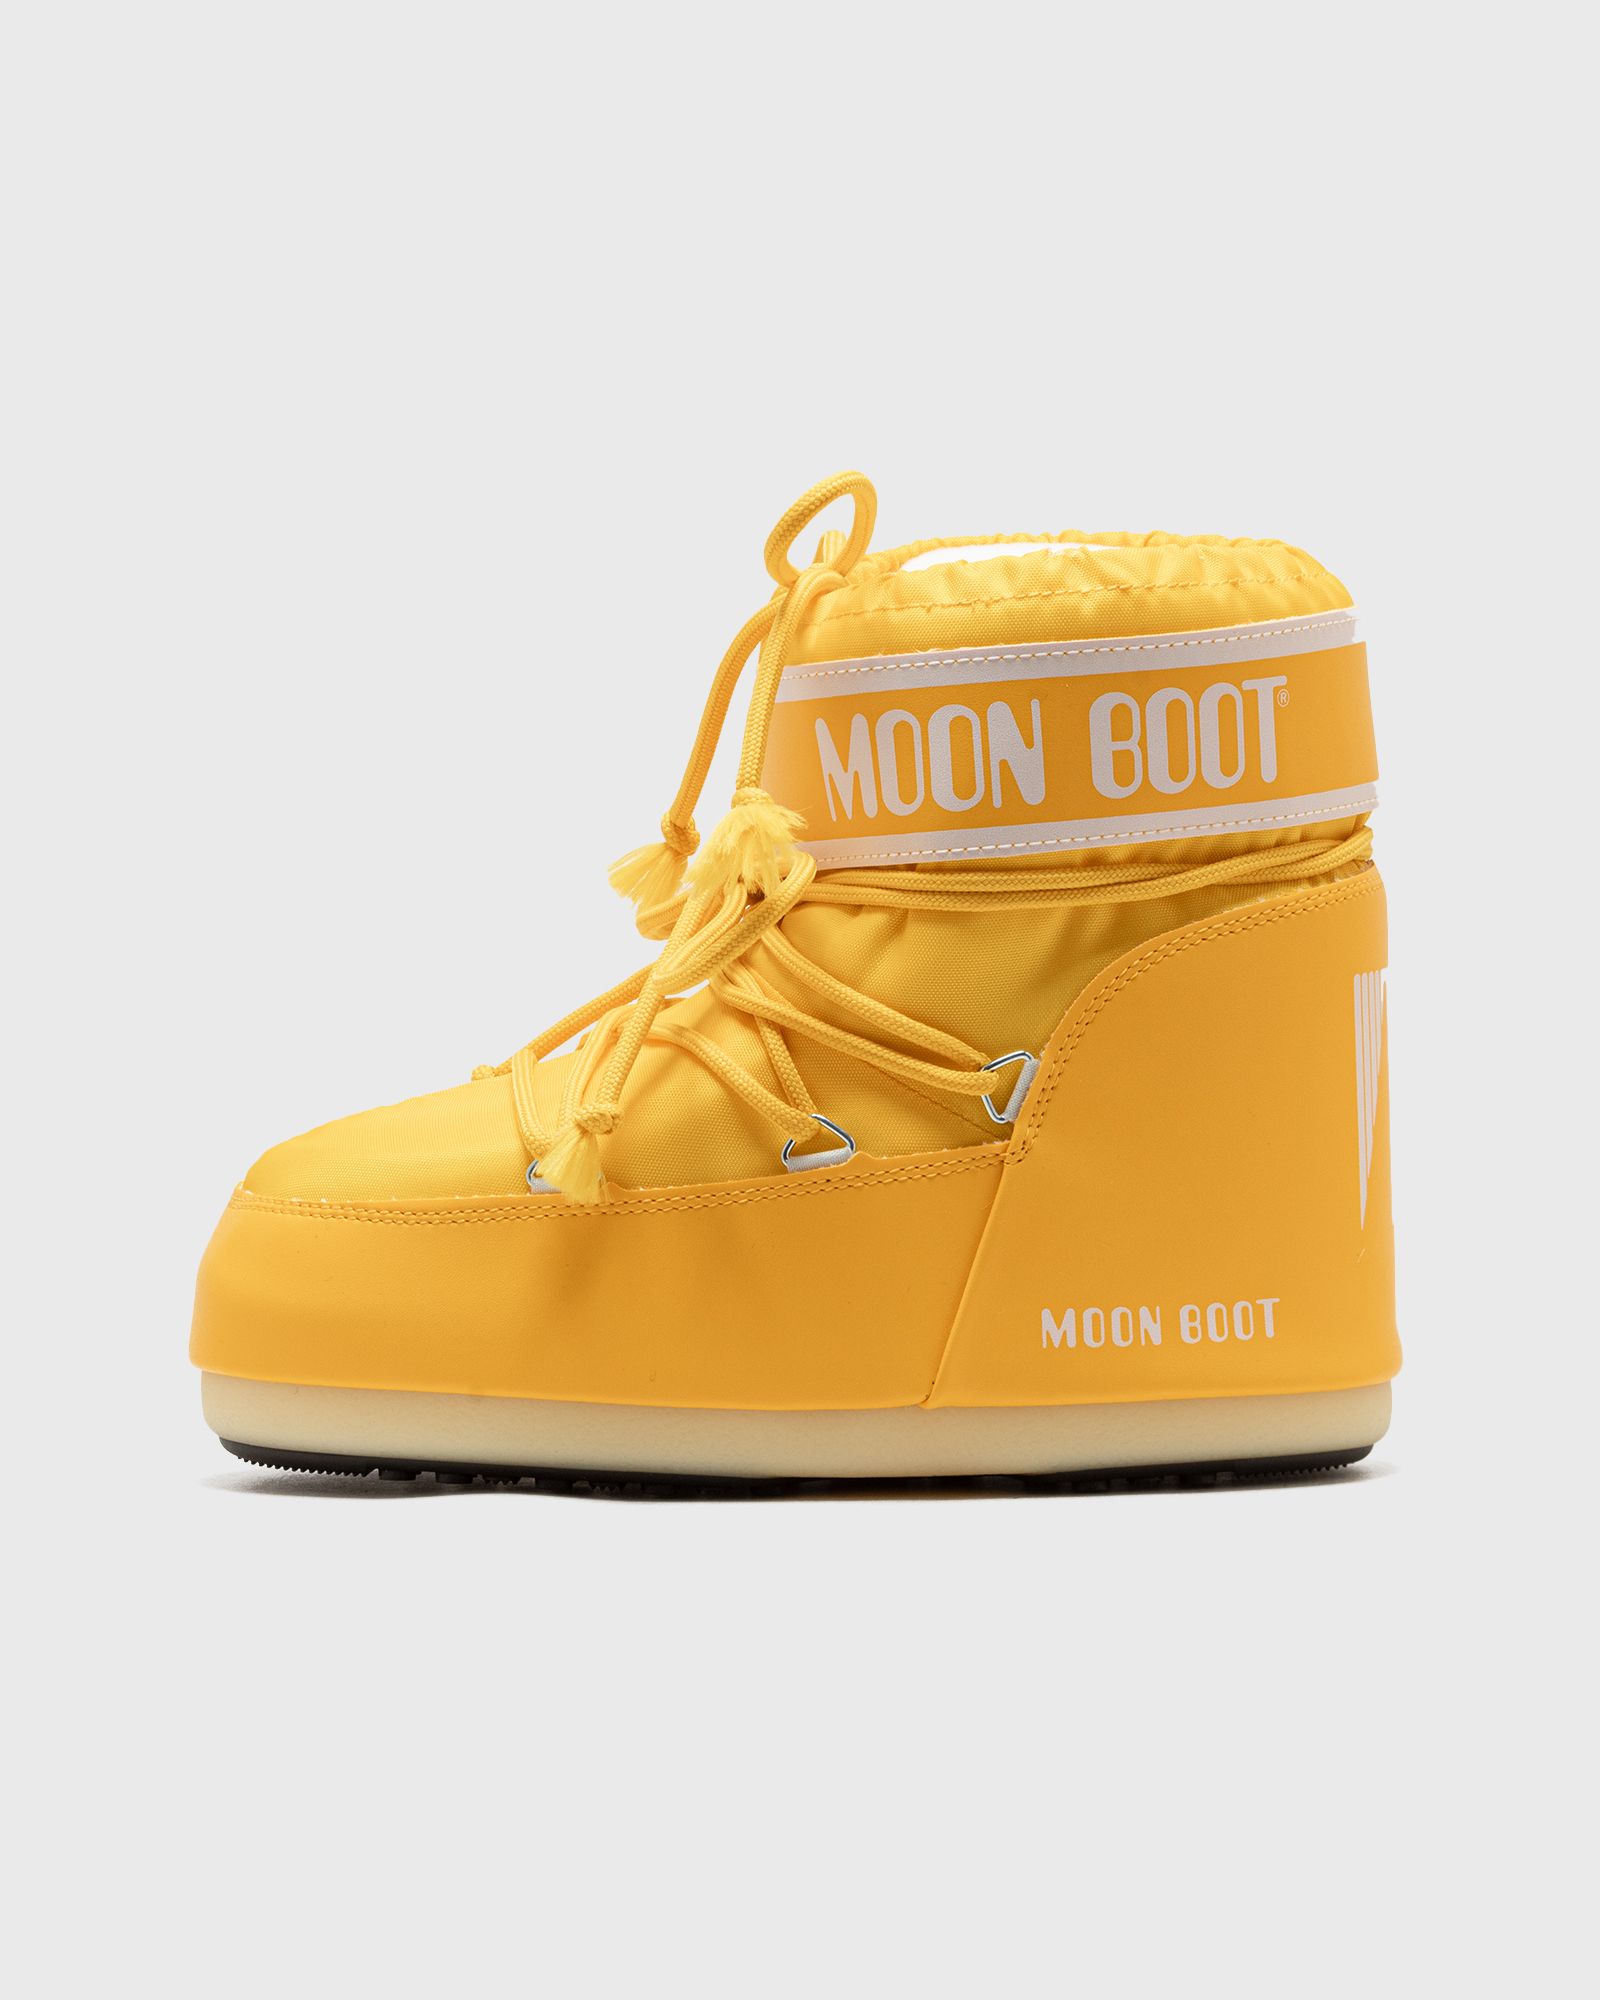 Moon Boot - icon low nylon men boots yellow in größe:39-41